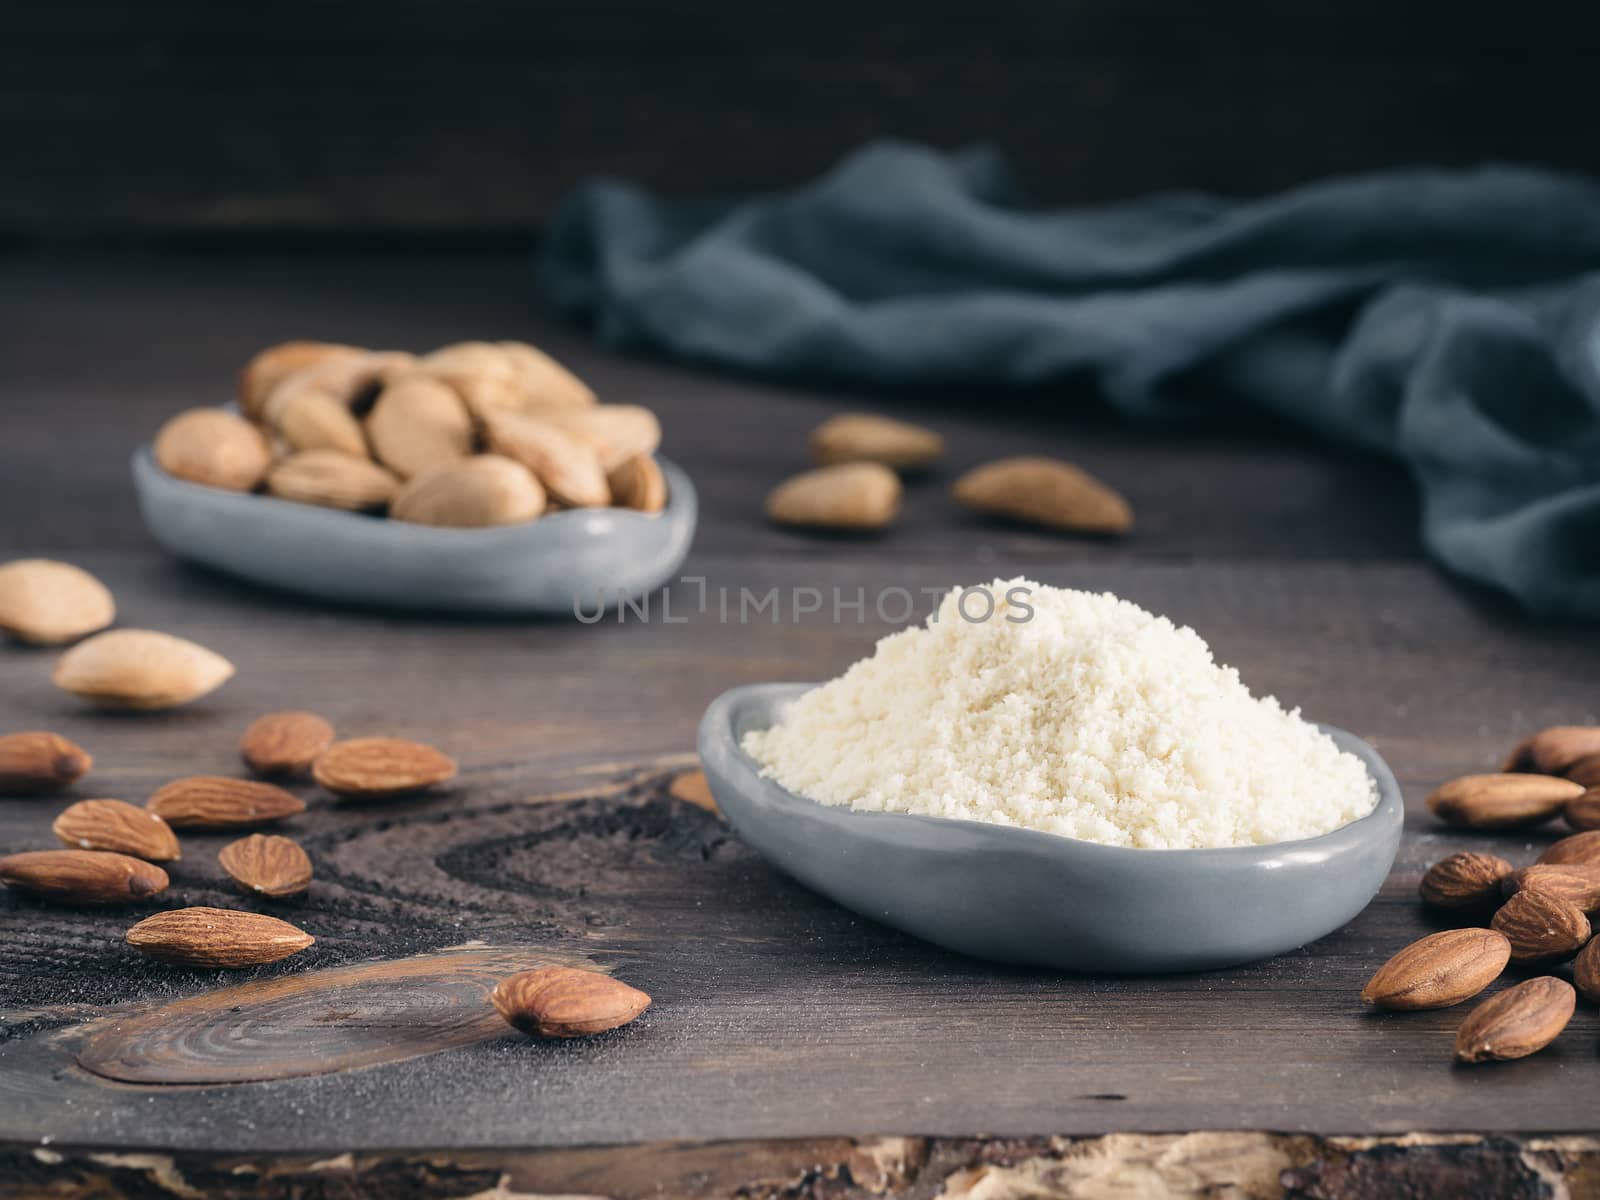 Almond powder in gray trendy plate and almonds on dark wooden table. Almond flour and peeled kernel almonds. Copy space.